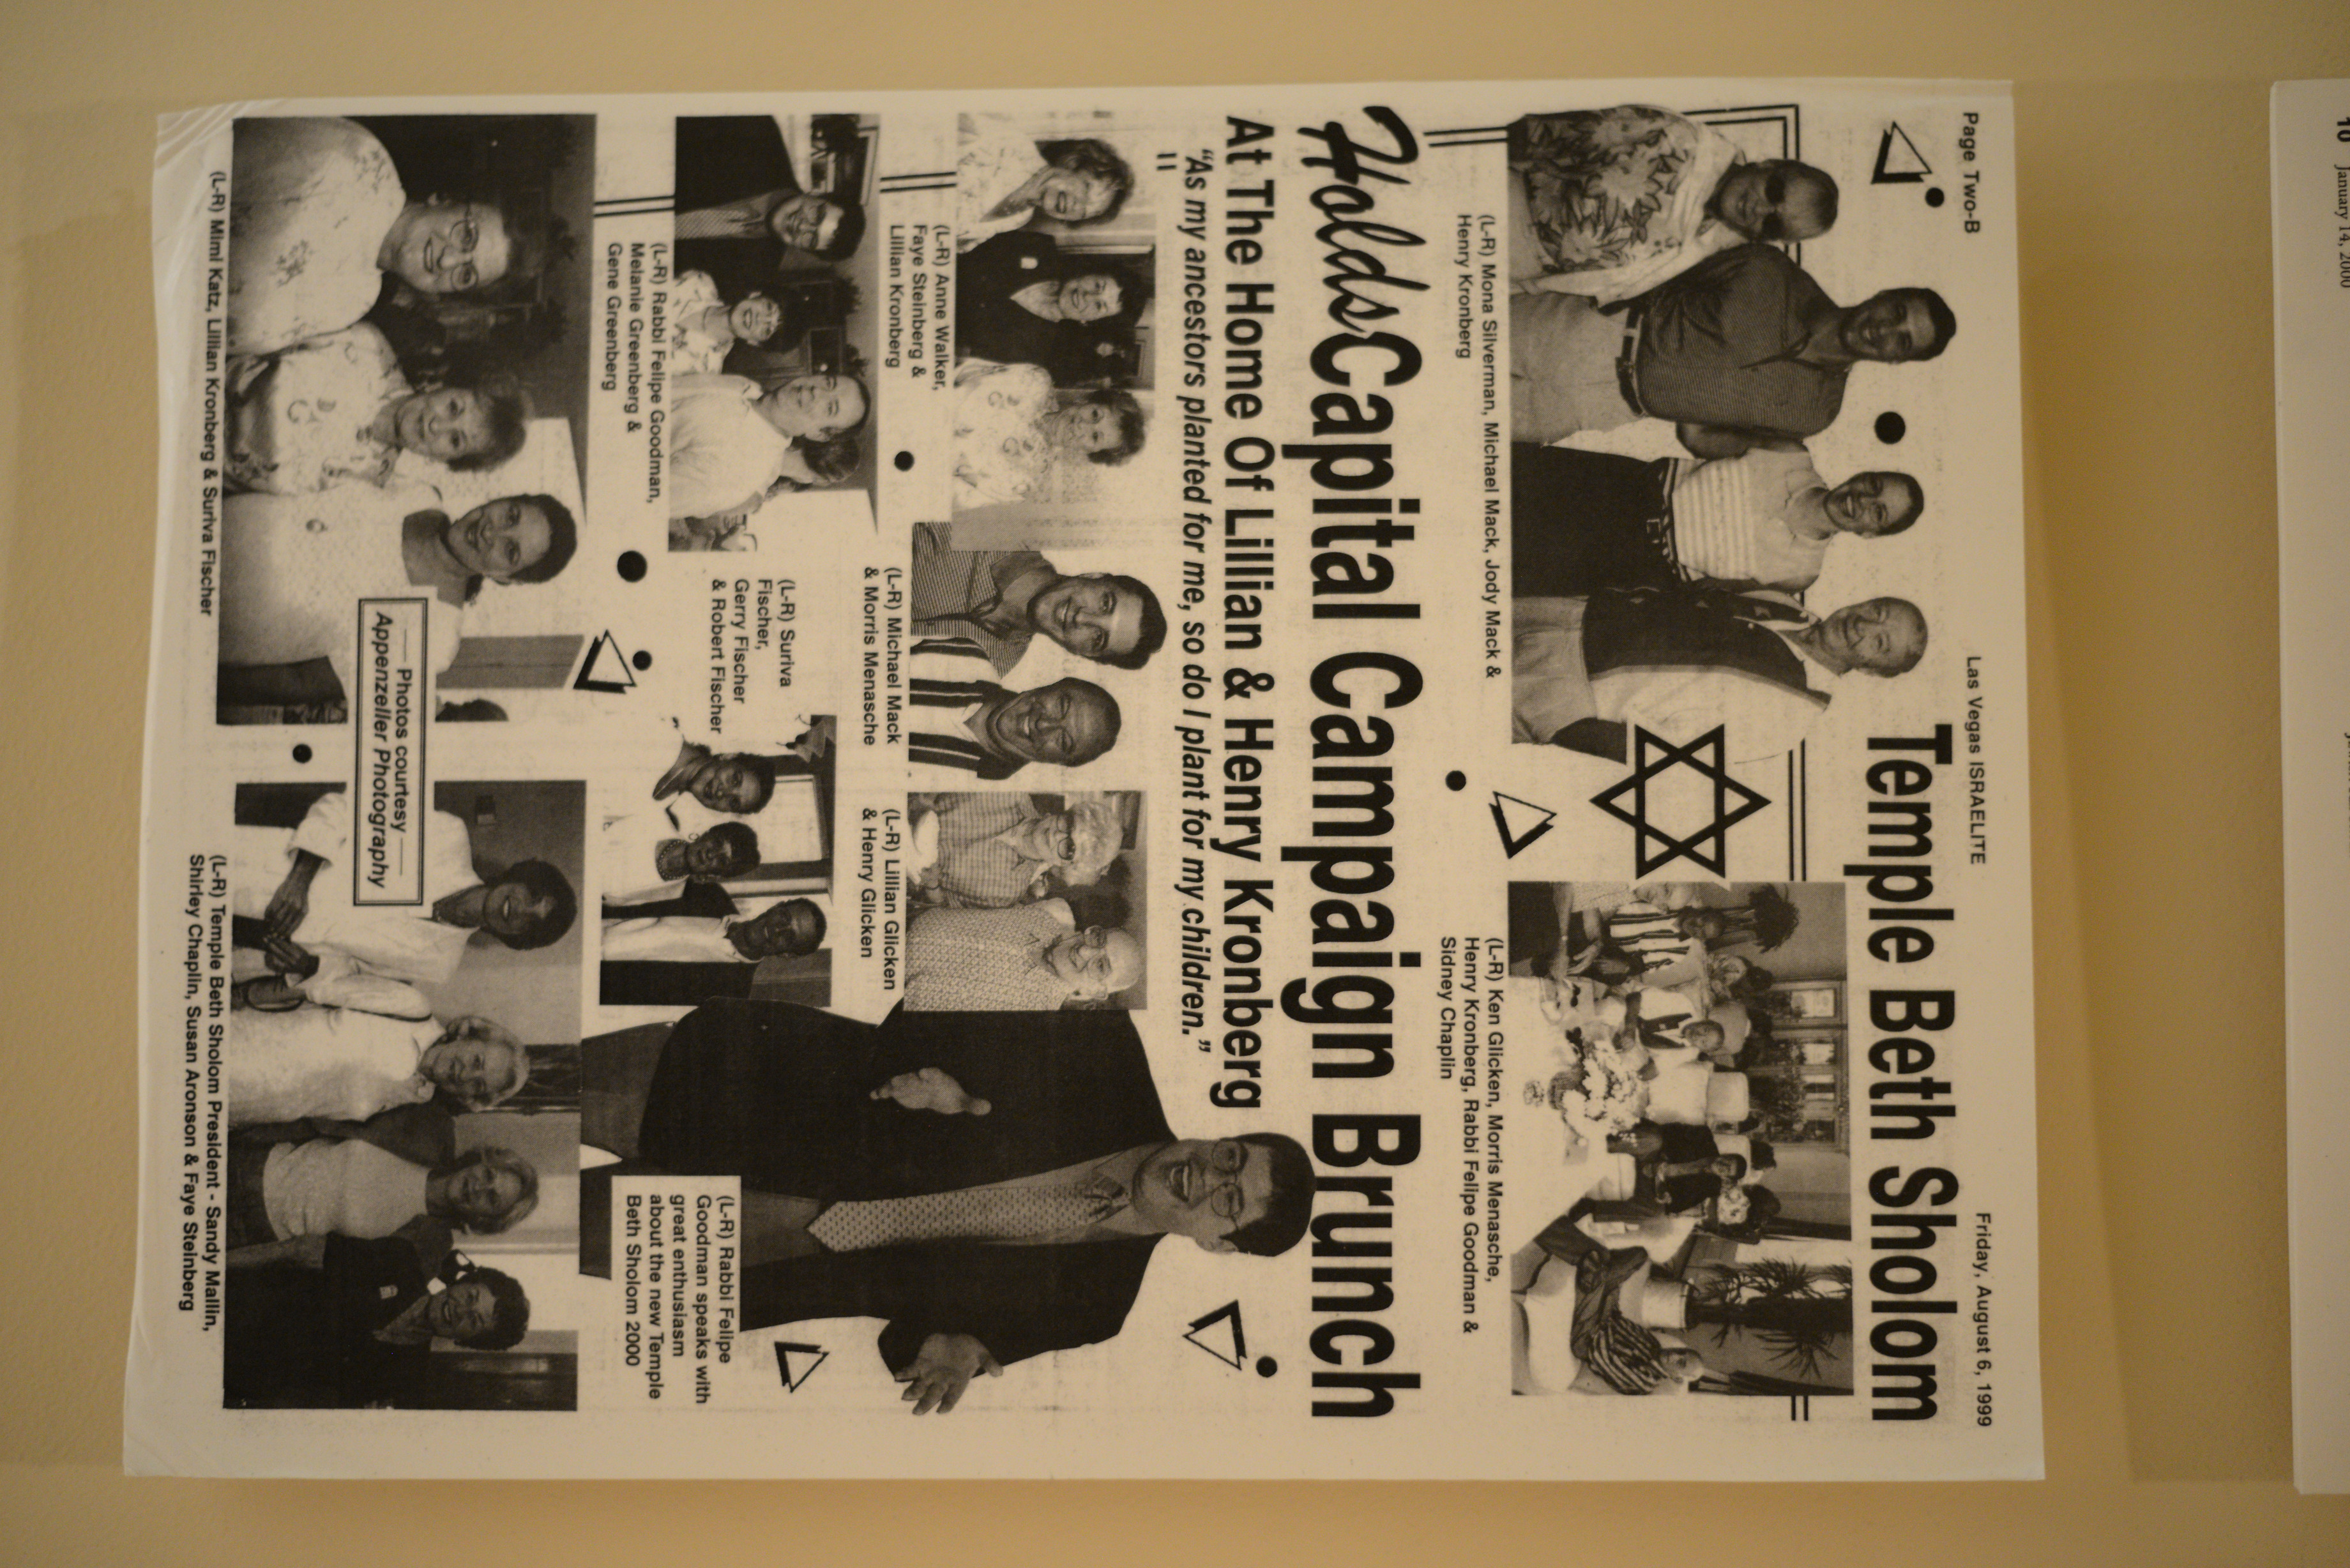 Photograph of newspaper clipping, Temple Beth Sholom Holds Capital Campaign Brunch at the home of Lillian and Henry Kronberg, Las Vegas Israelite, August 6, 1999